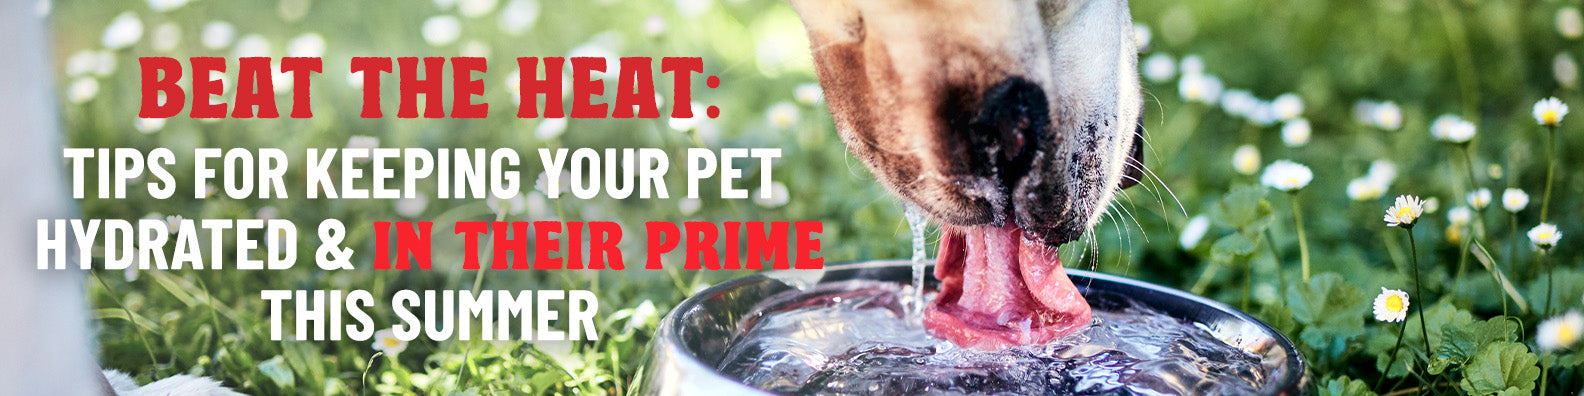 Beat the Heat: Tips for Keeping Your Pet Cool & Hydrated This Summer